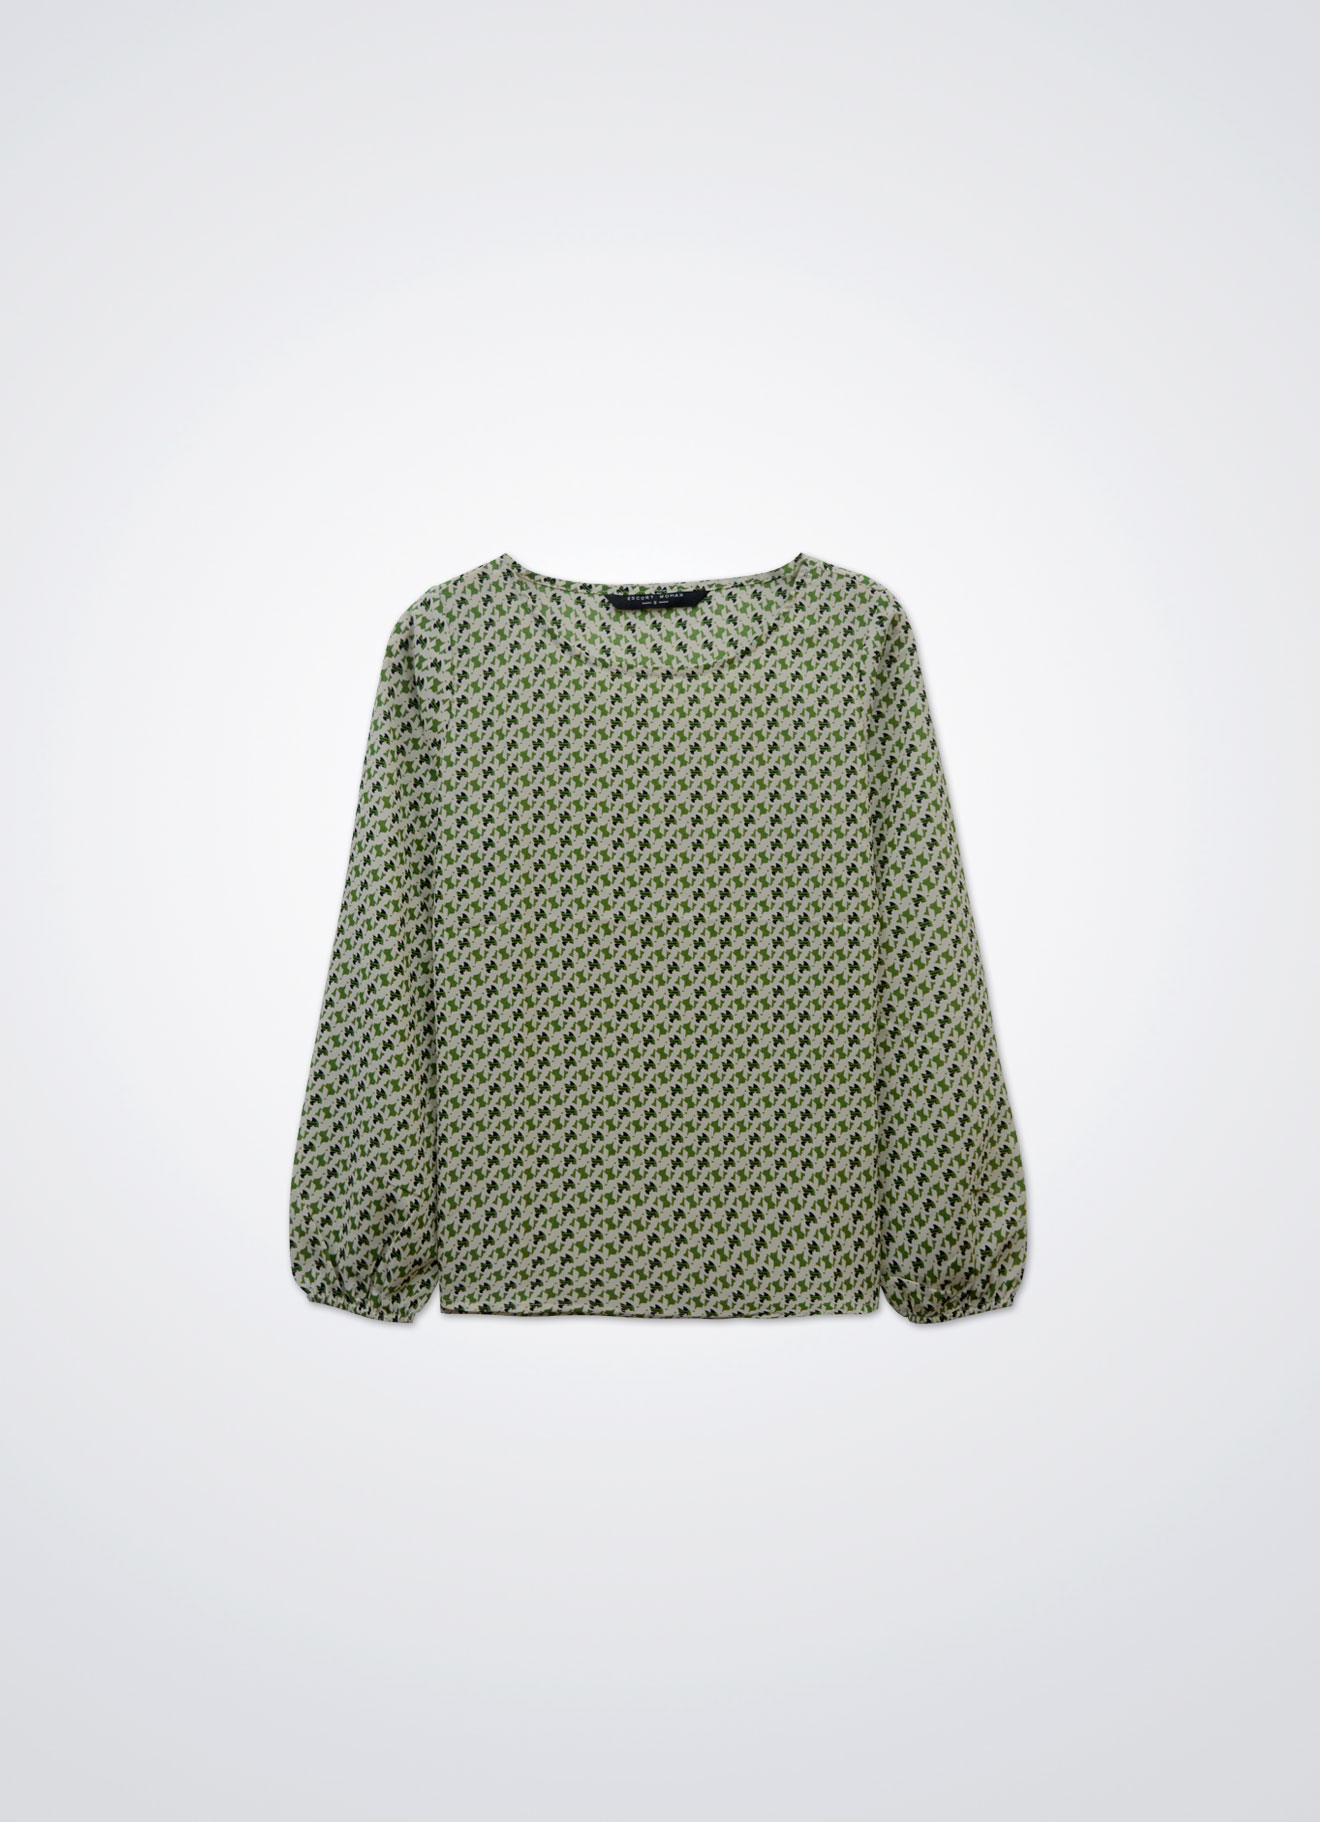 Piquant-Green by Long Sleeve Top